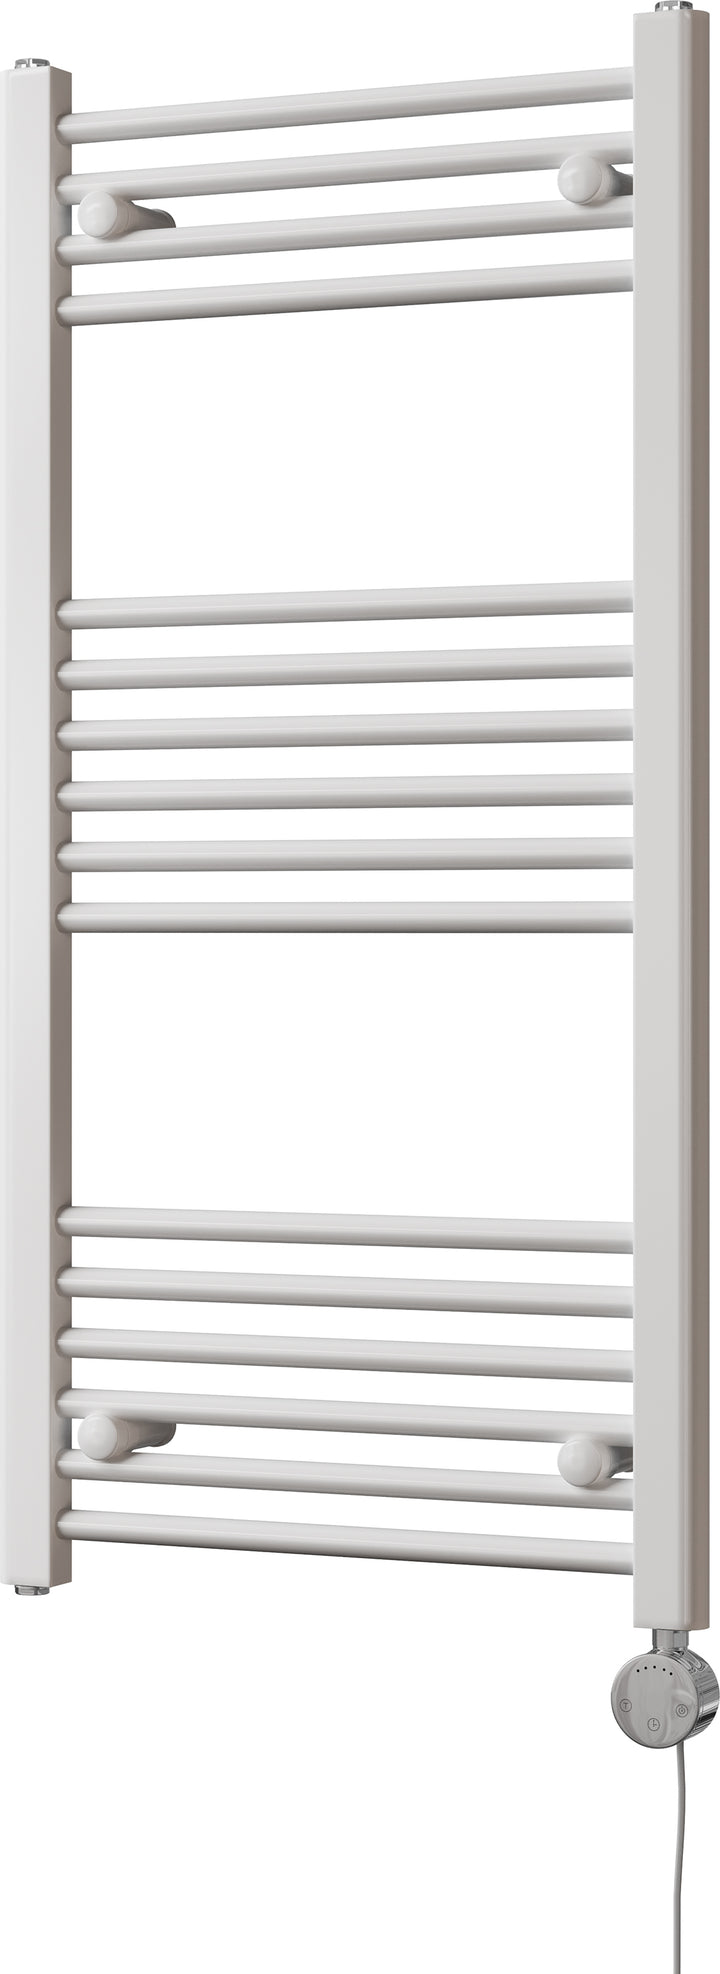 Zennor - White Electric Towel Rail H1000mm x W500mm Straight 300w Thermostatic